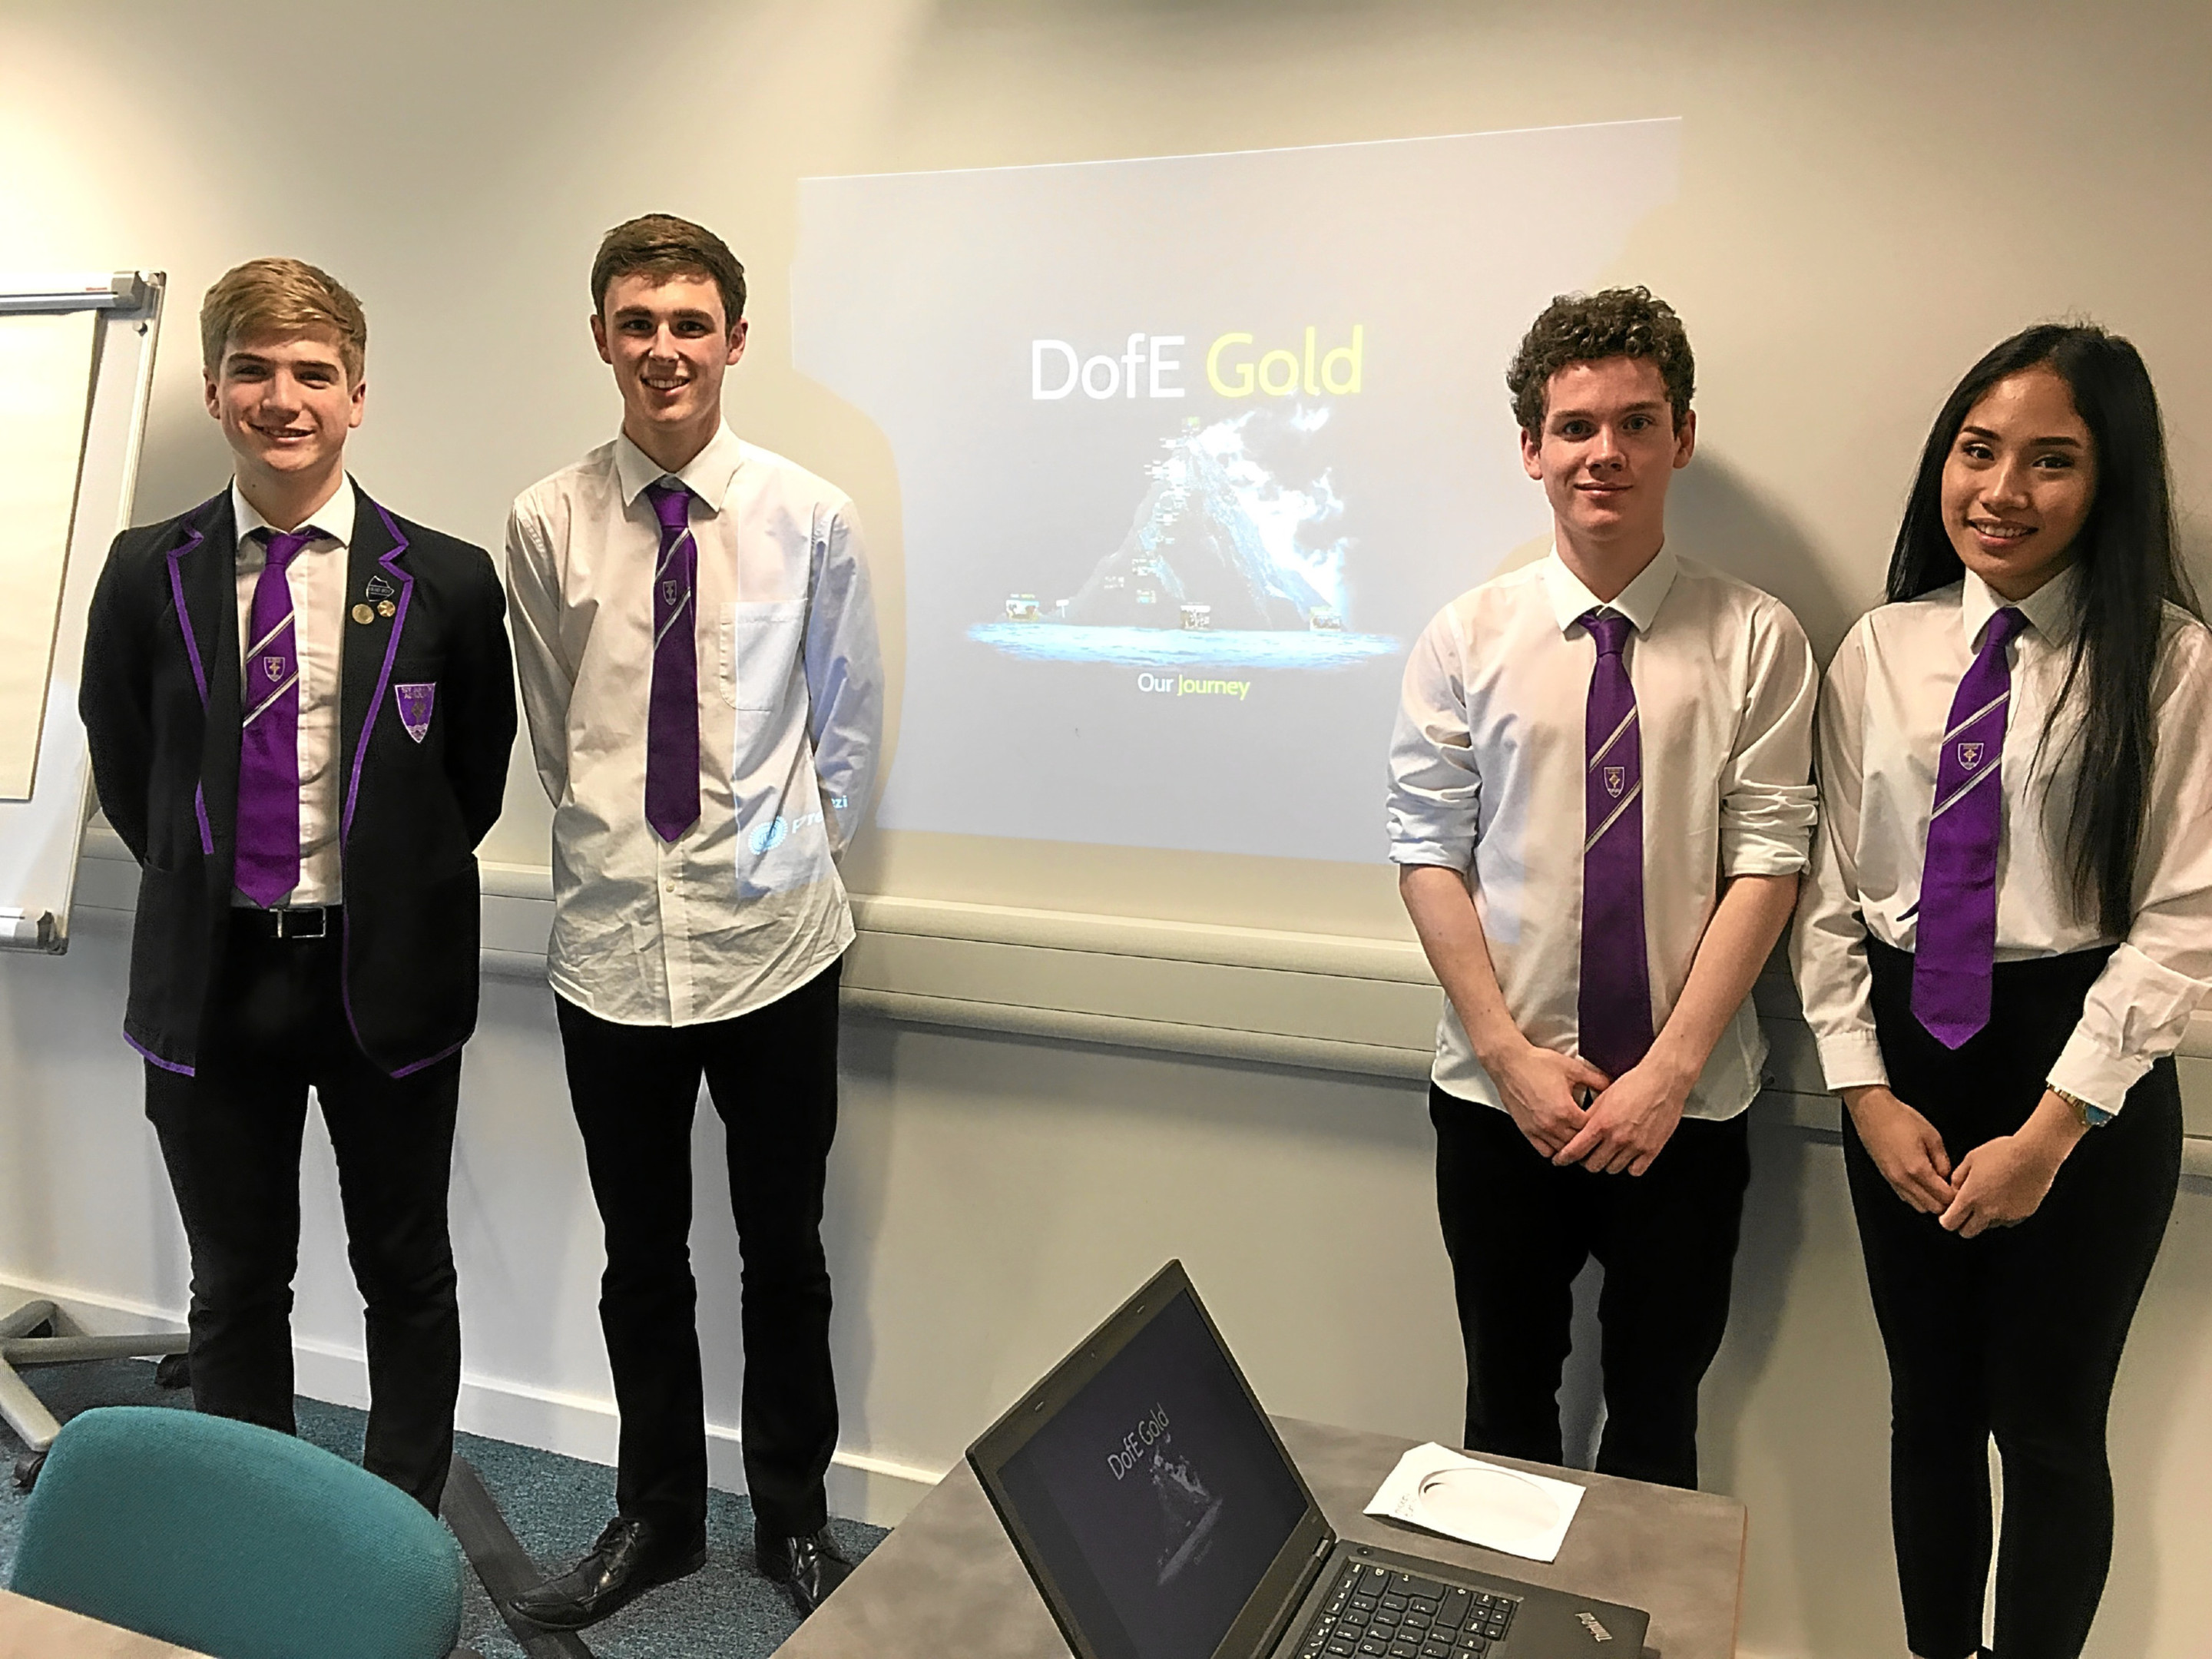 S6 pupils (Andrew Blain, Niall Martin, Harris Blain and Samantha Leano) from St Johns Academy recently shared their Duke of Edinburgh journey to mark the final part of their award process.